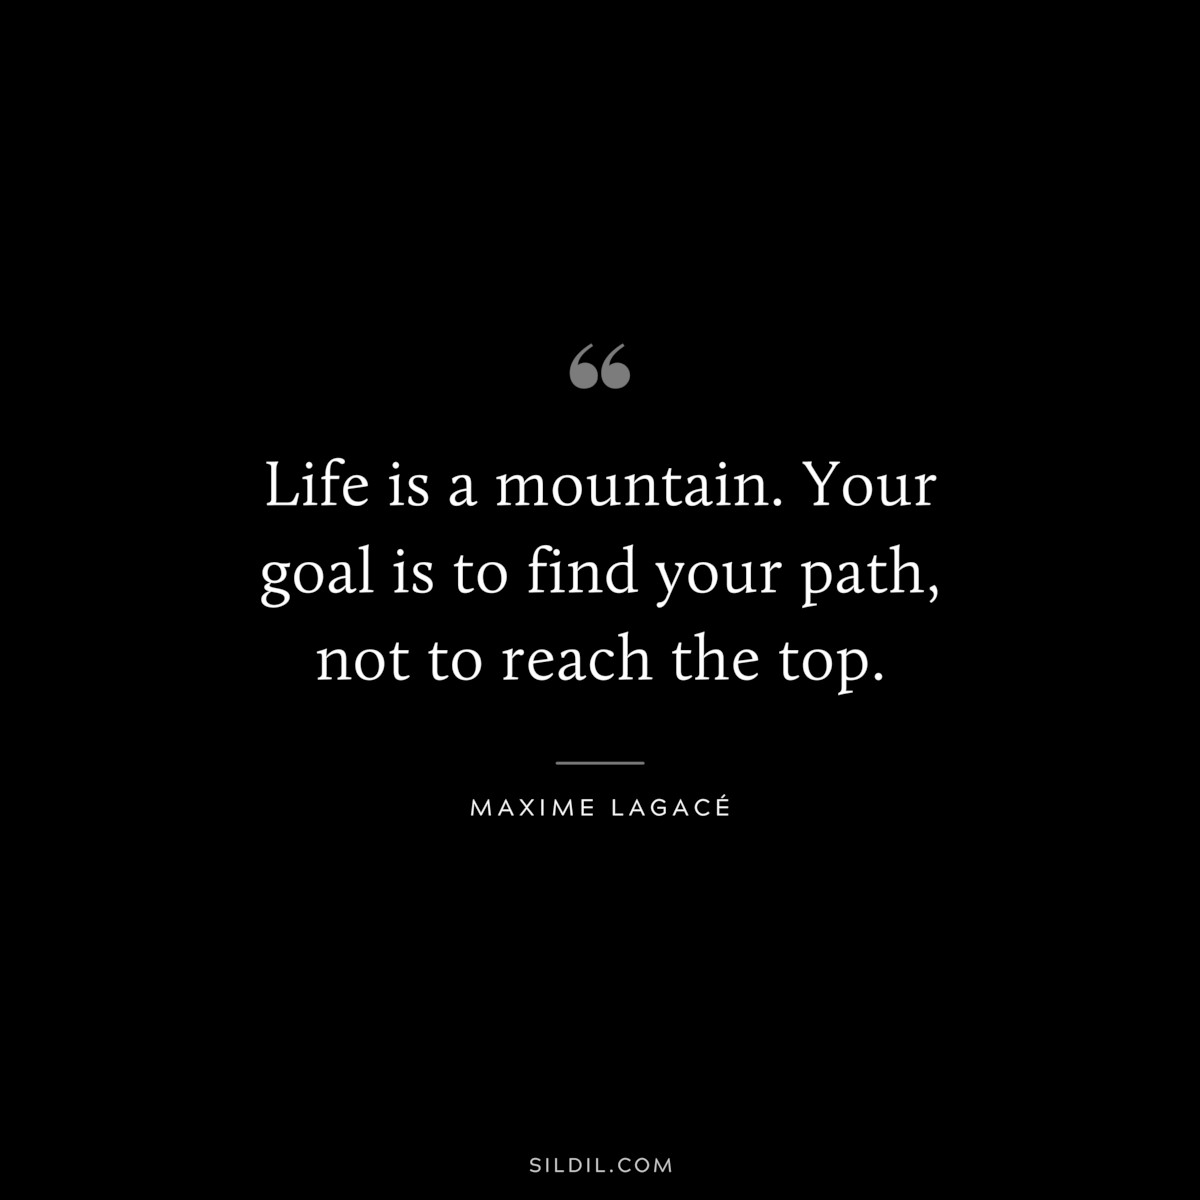 Life is a mountain. Your goal is to find your path, not to reach the top. ― Maxime Lagacé